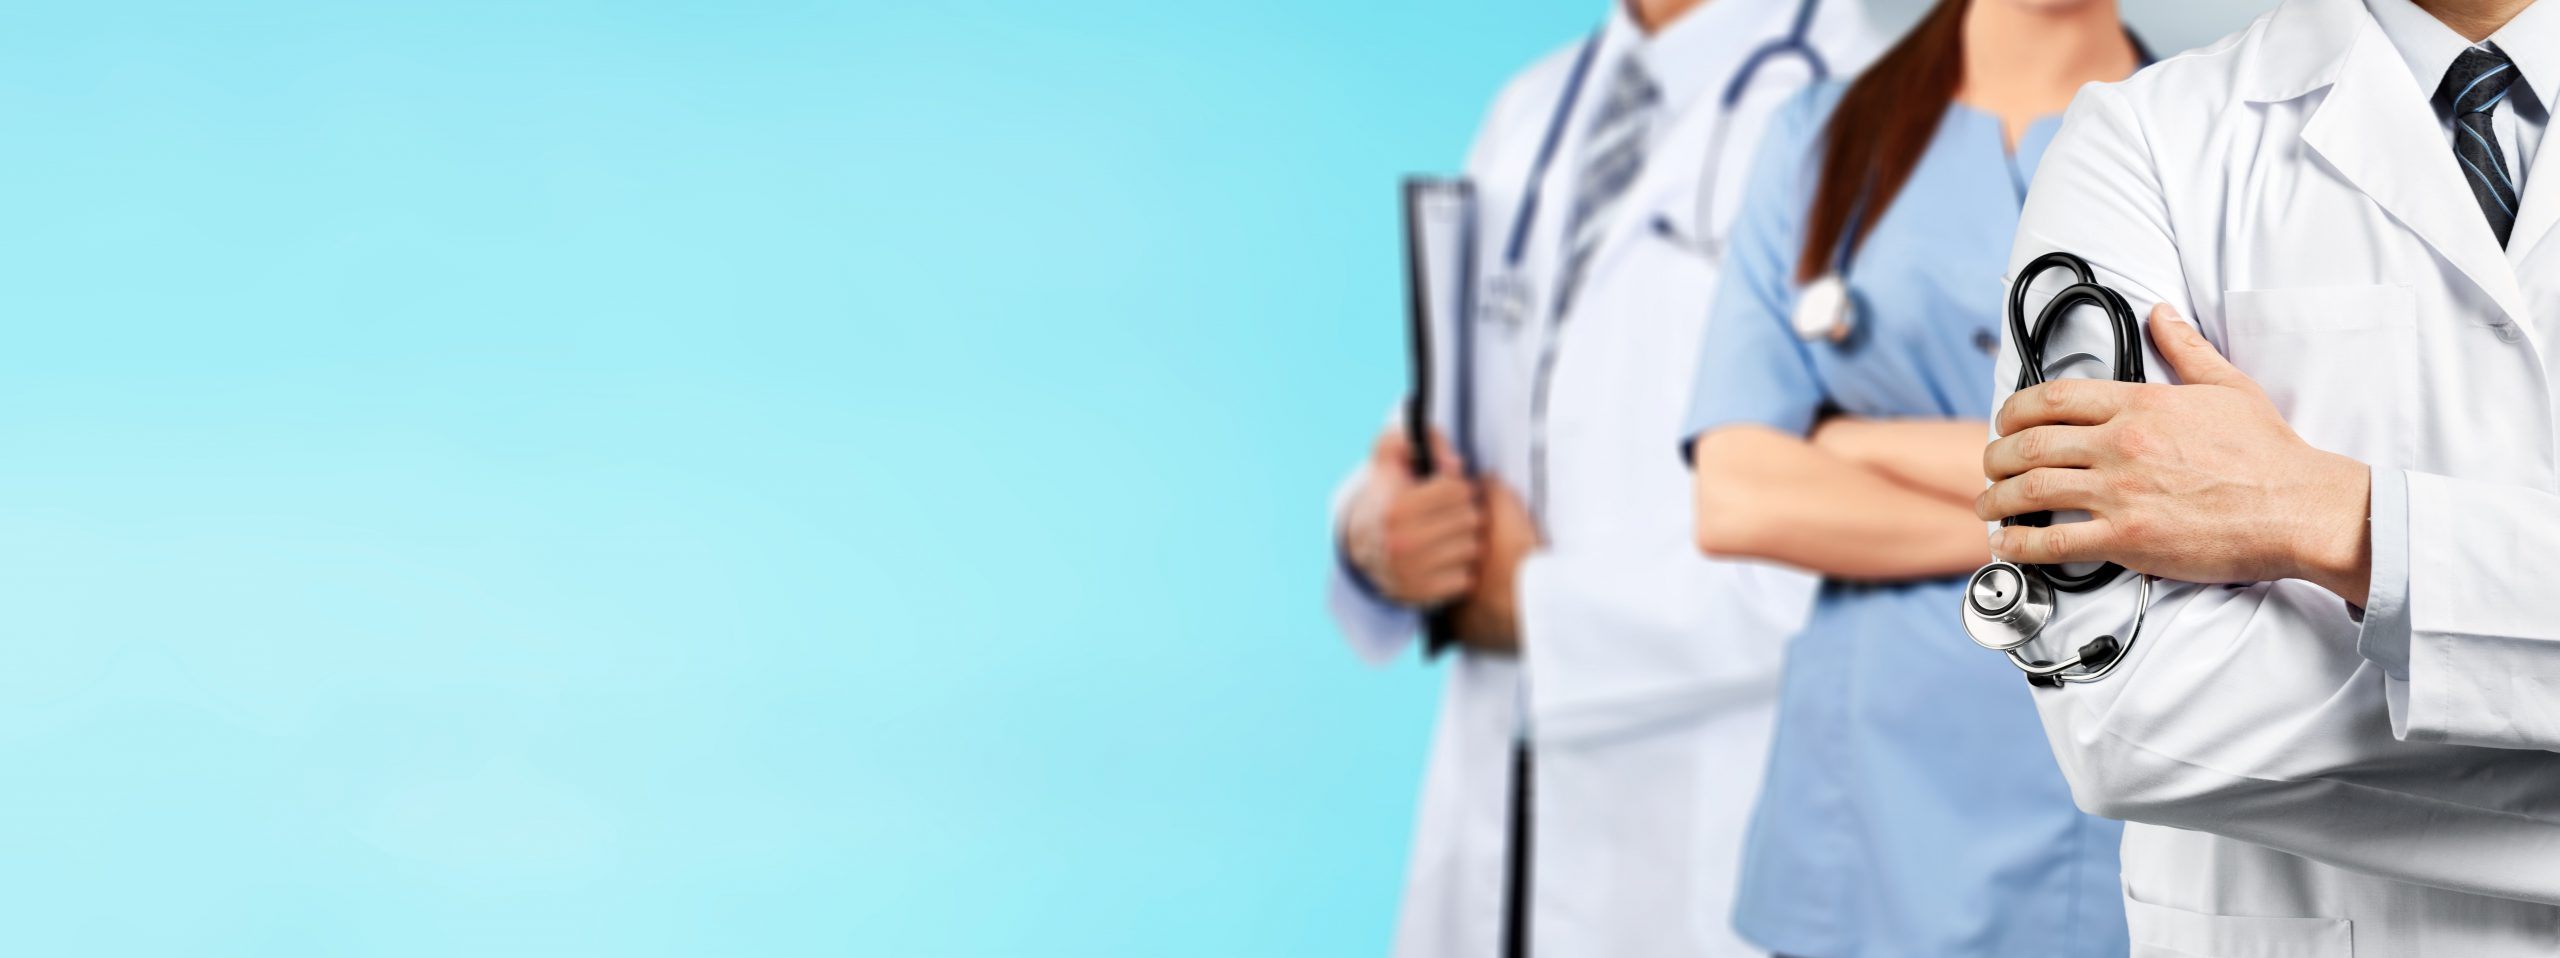 10 Signs Your Healthcare Provider is Not HIPAA Compliant